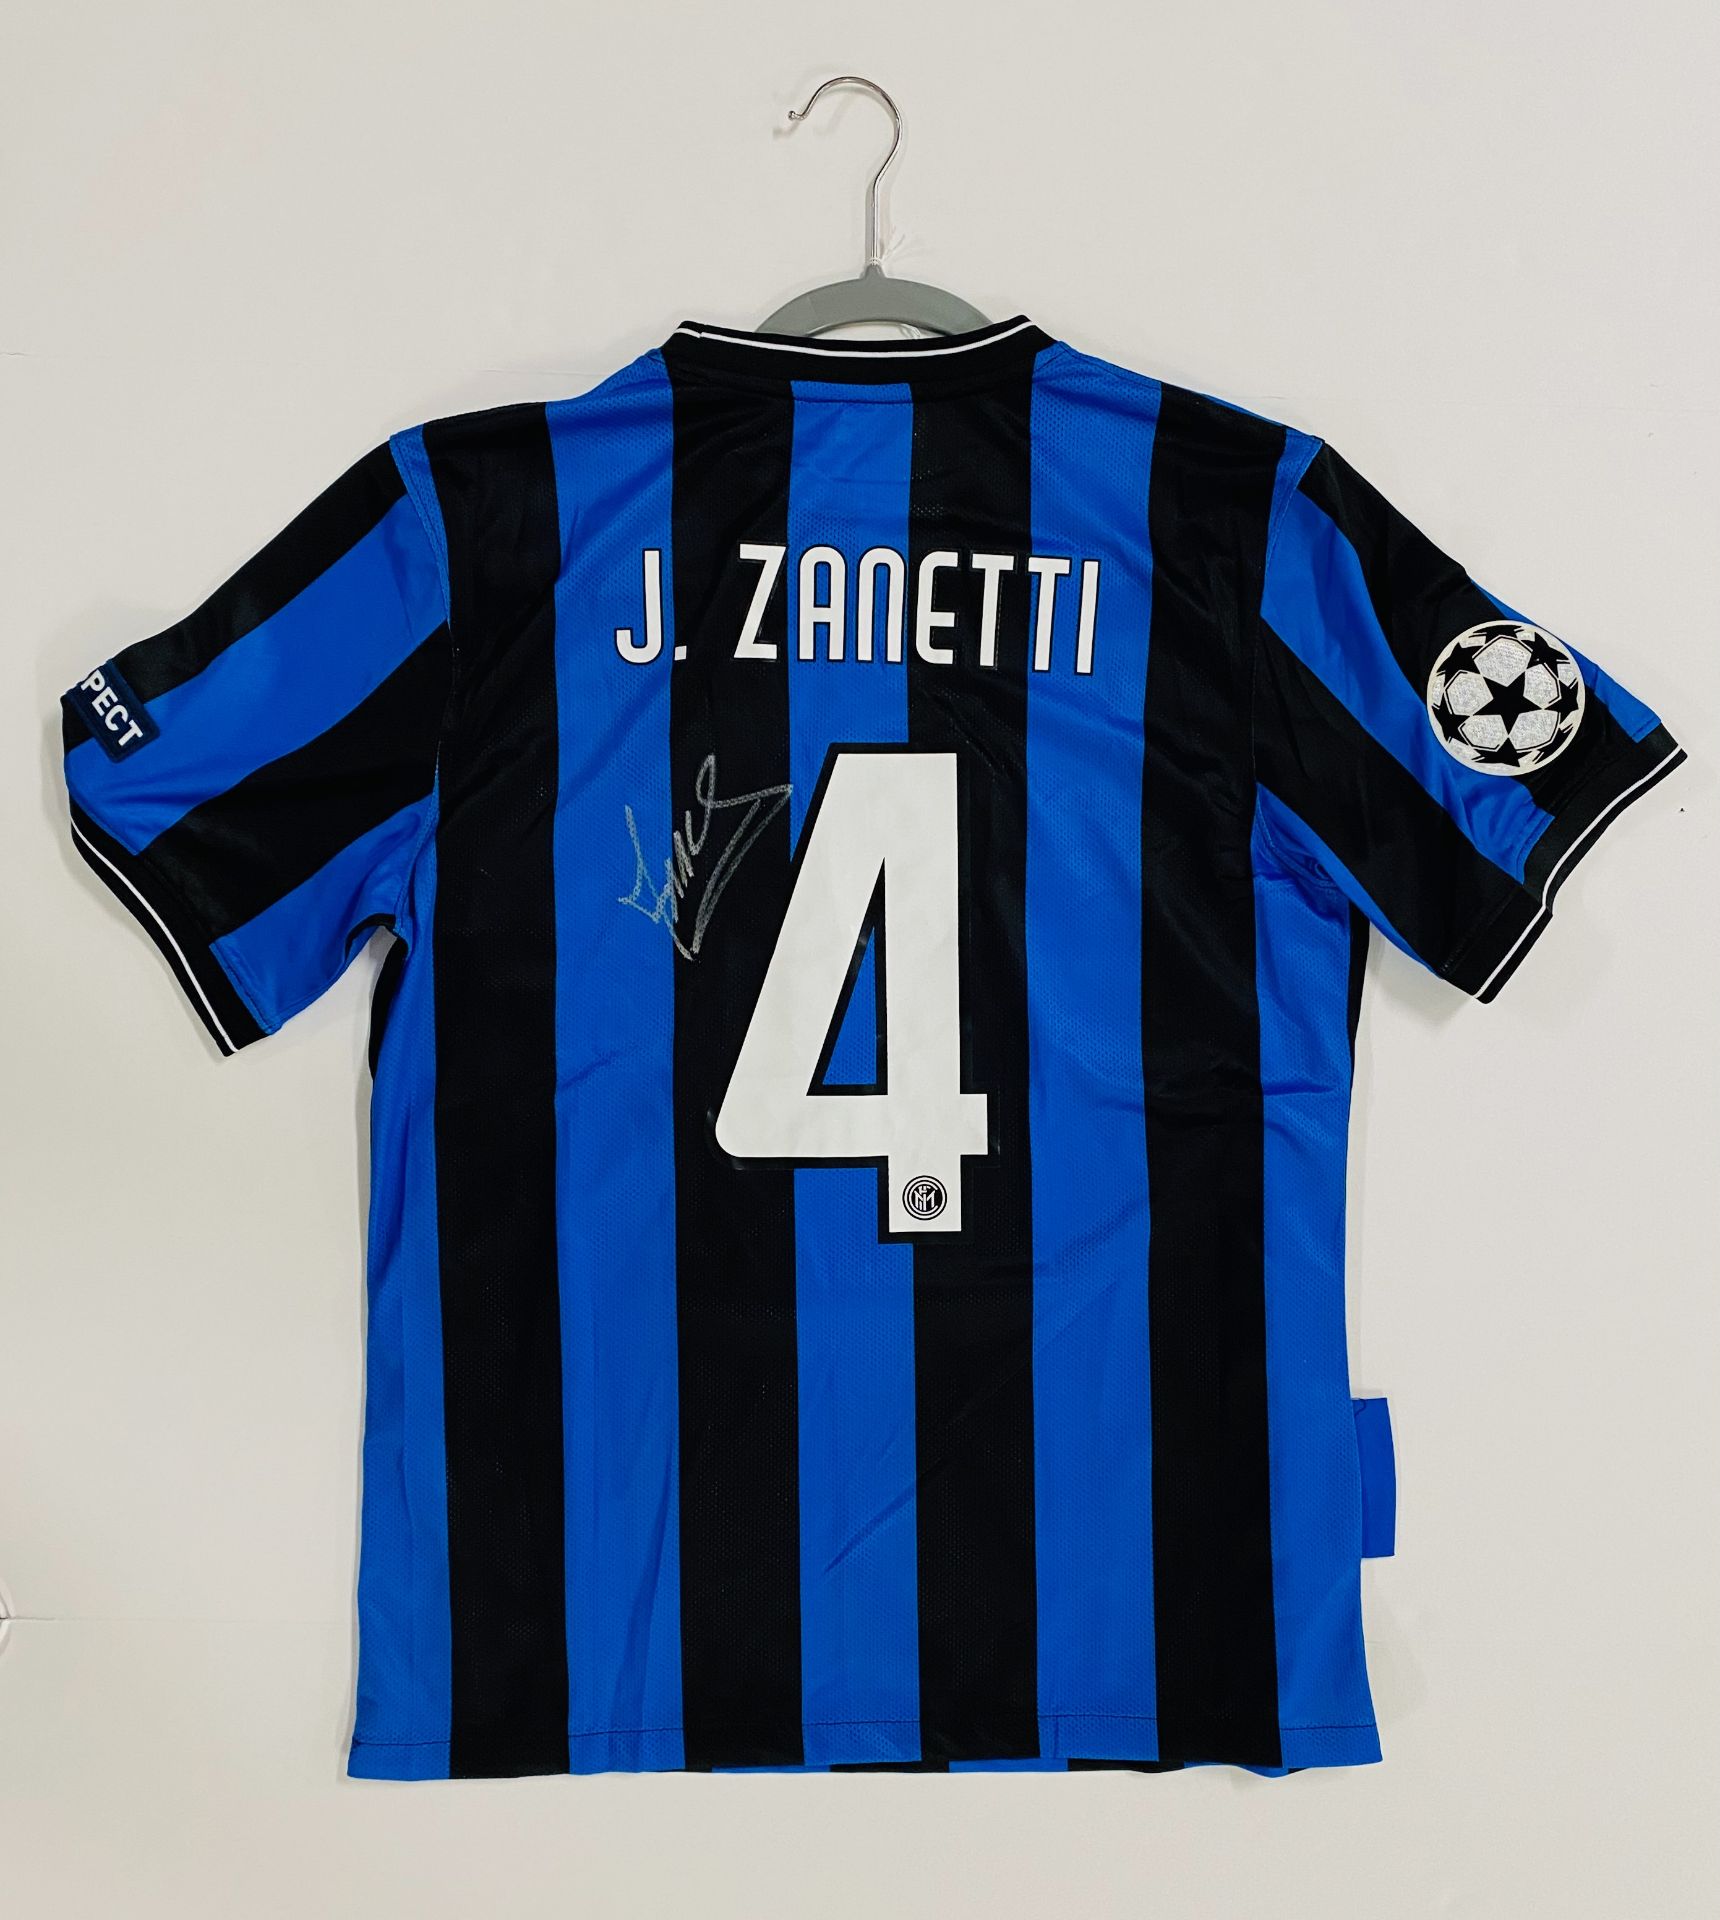 Inter Milan 2010 Champions League winners signed jersey - Image 2 of 3